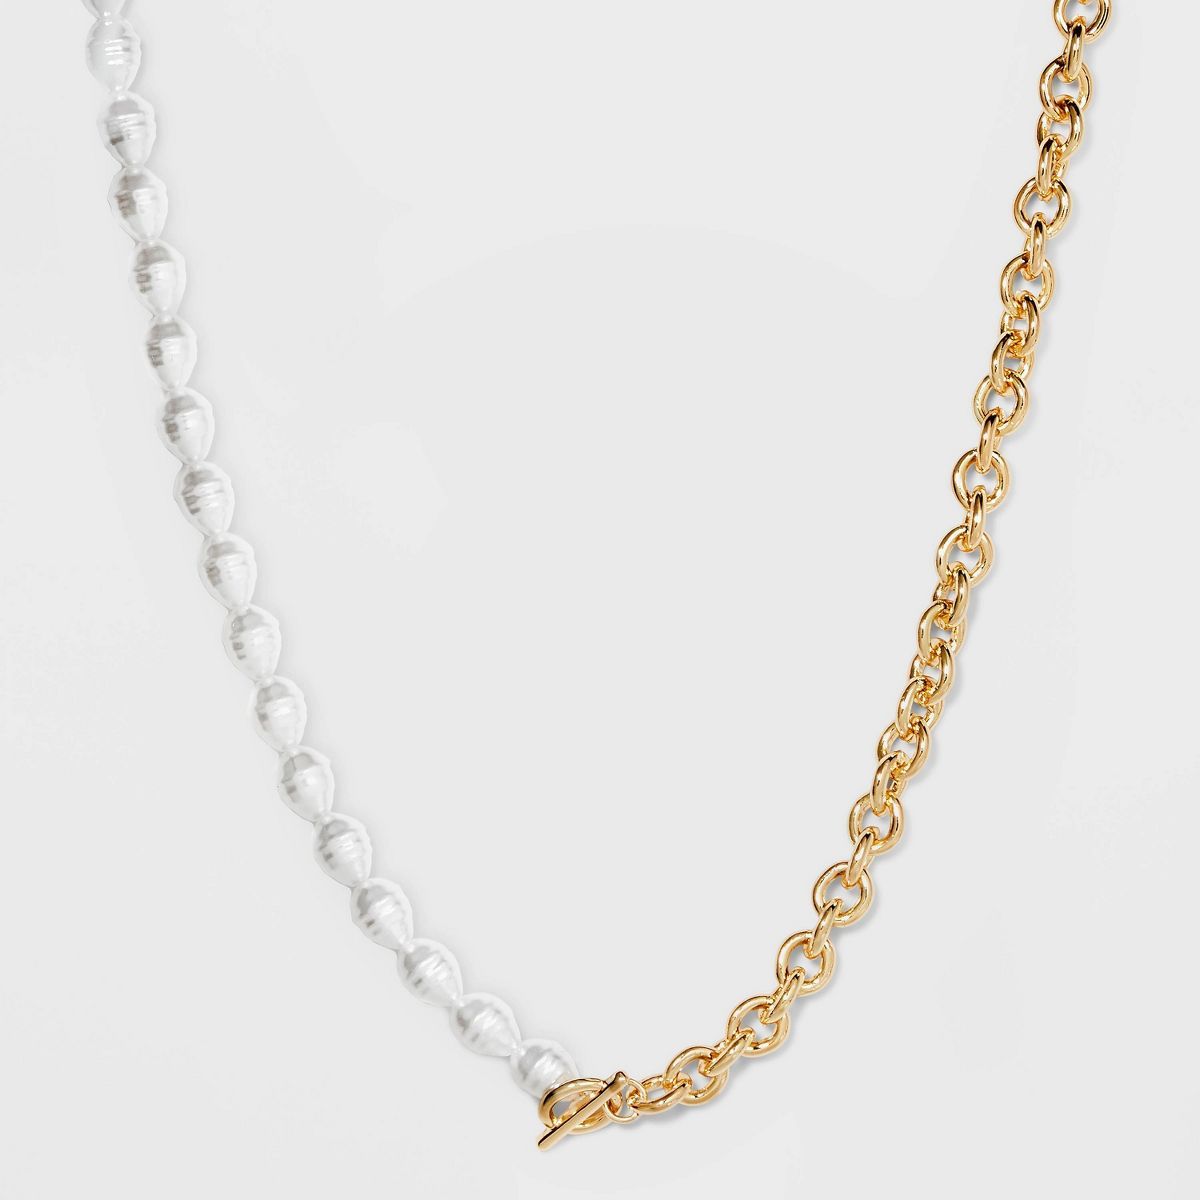 SUGARFIX by BaubleBar Gold and Pearl Necklace - Gold/White | Target